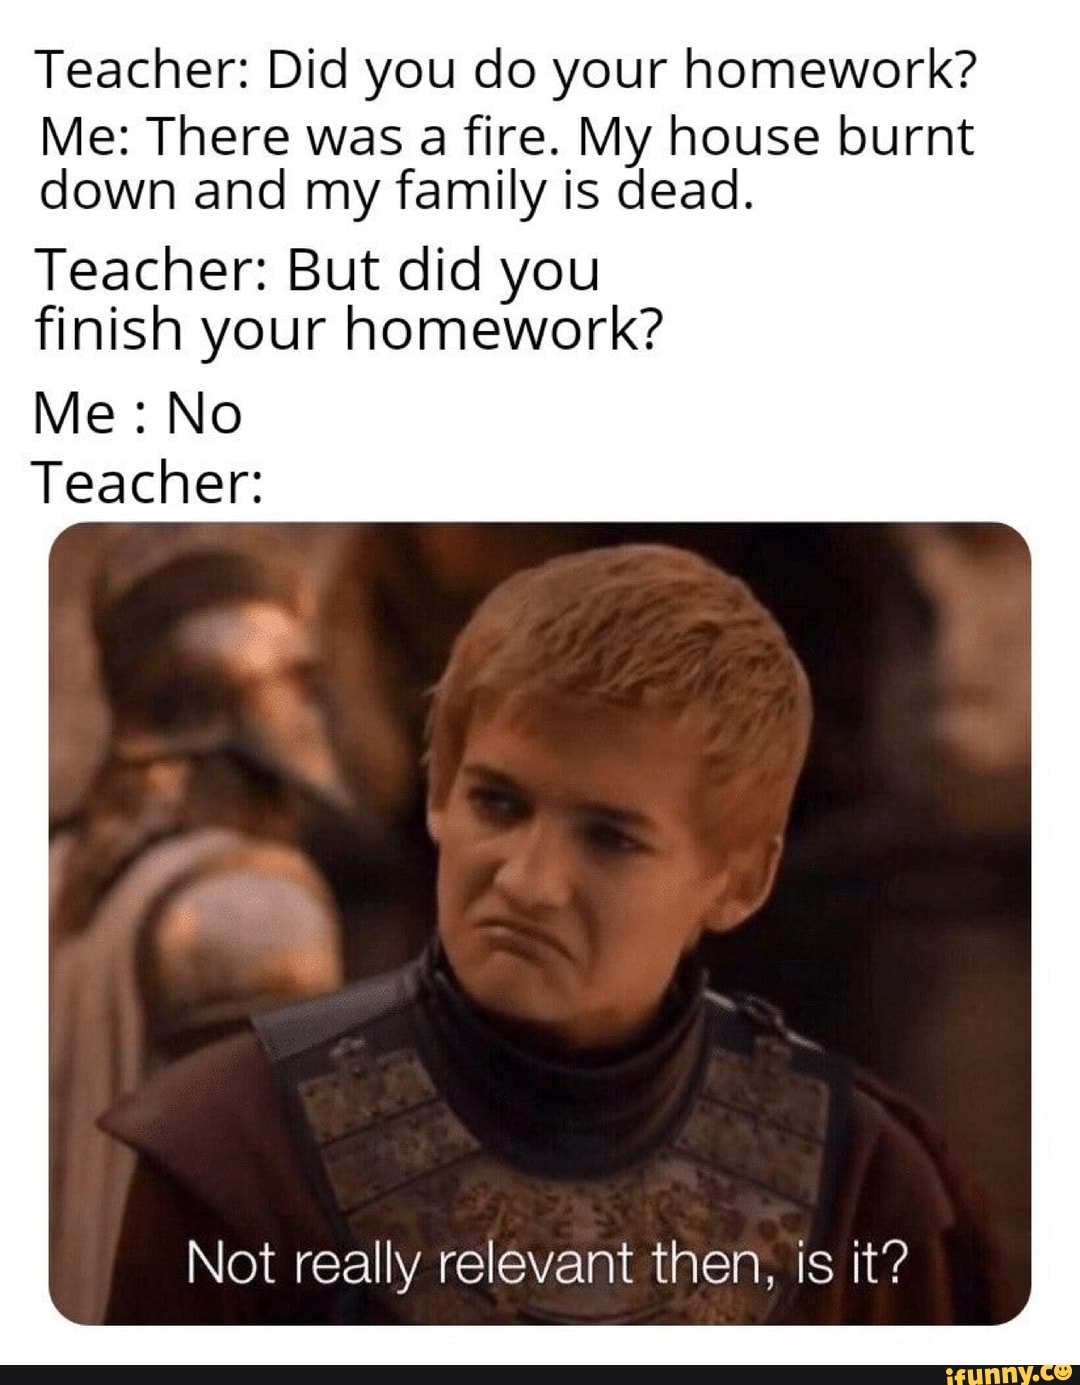 You can do your homework